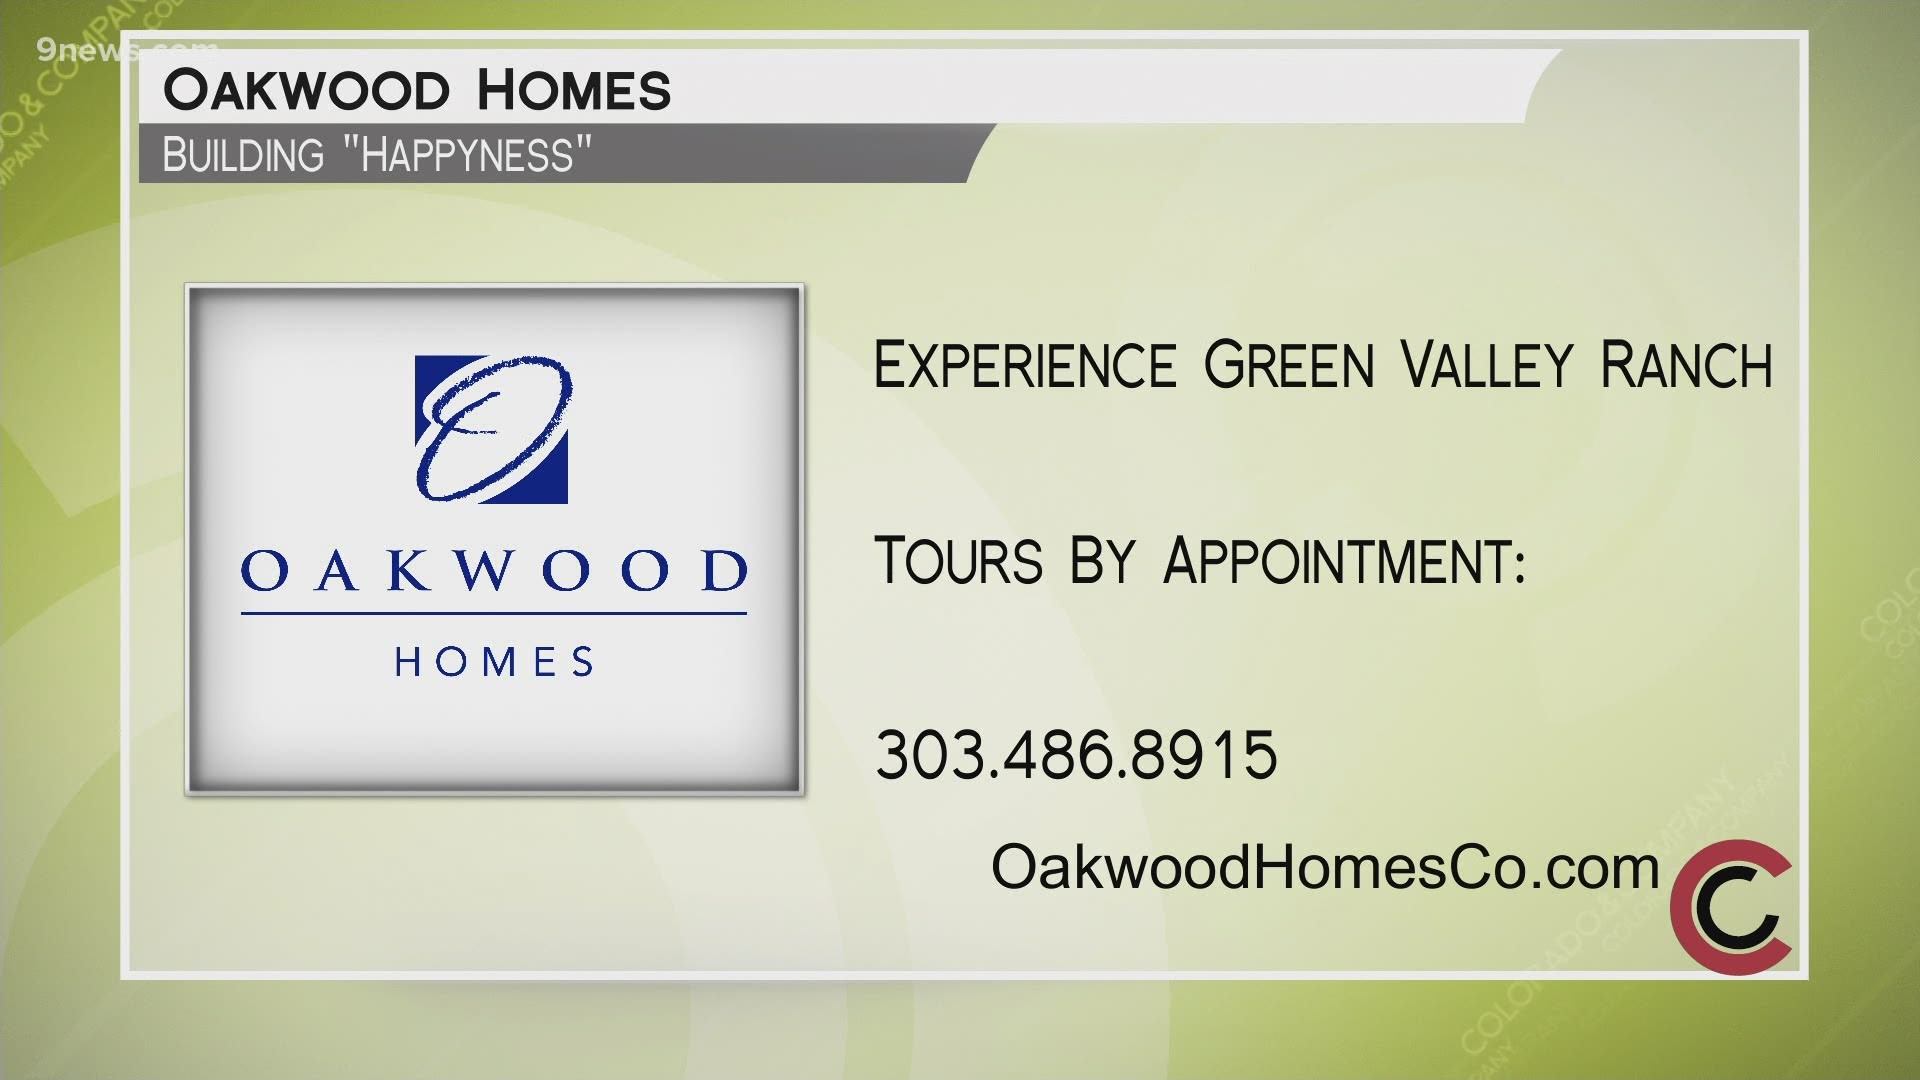 Call 303.486.8915 or visit OakwoodHomesCO.com to schedule an appointment to tour an Oakwood Homes Community.